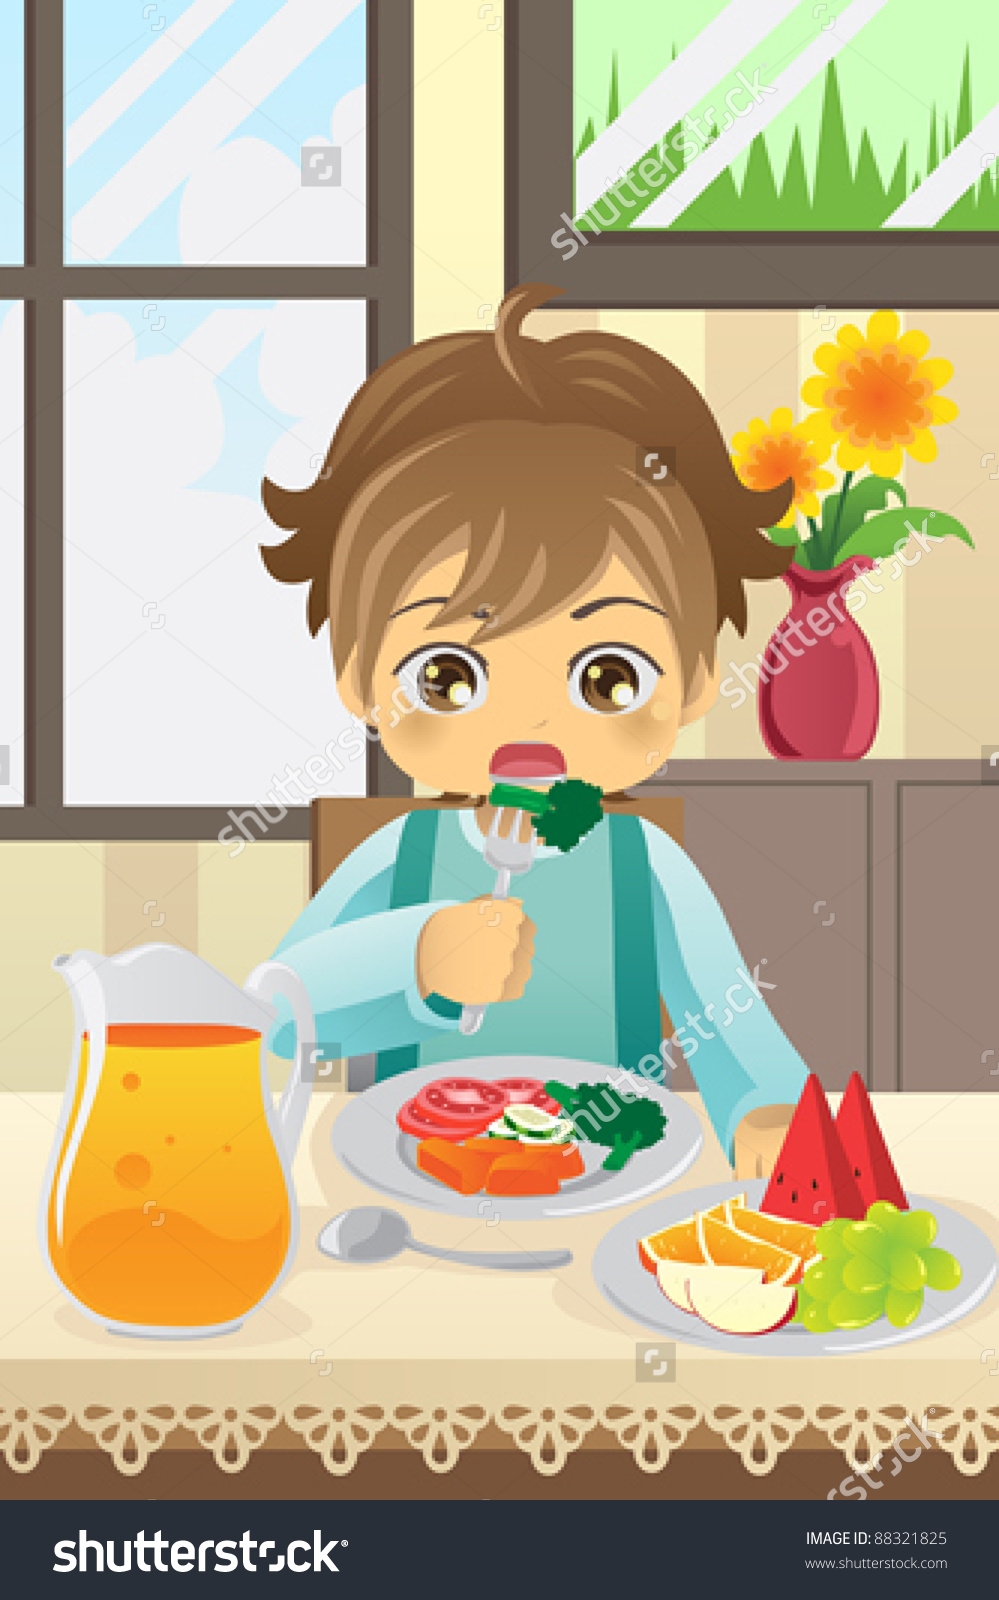 Eating nutritious food clipart